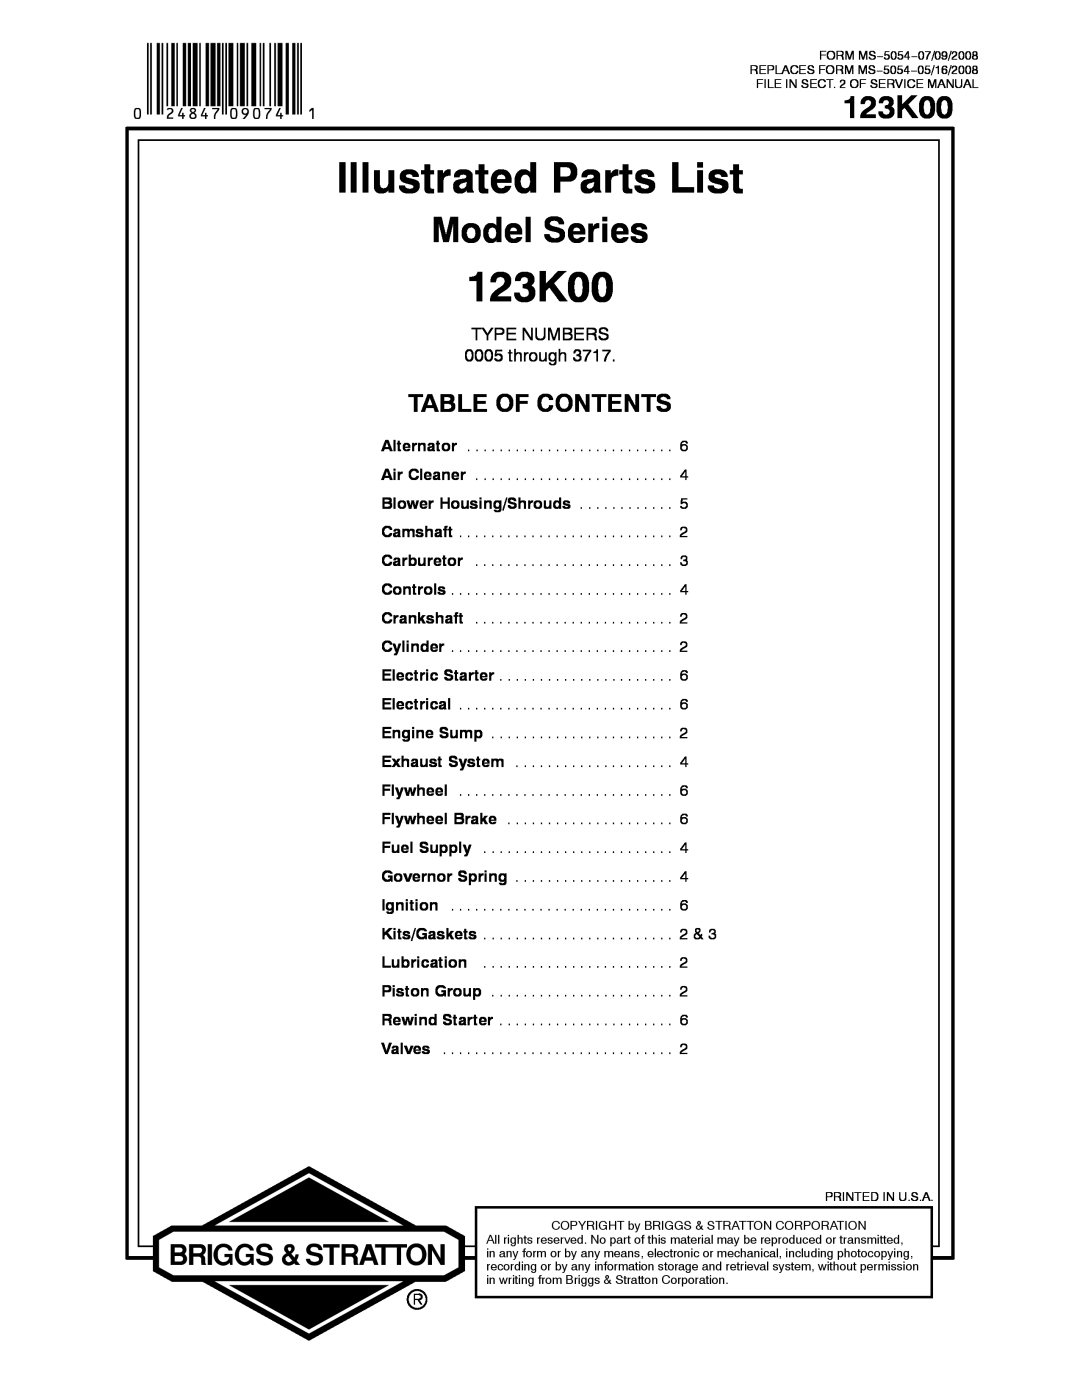 Briggs & Stratton 123K00 0269, MS5054, 123K00 0236 service manual Illustrated Parts List, Model Series, Table Of Contents 